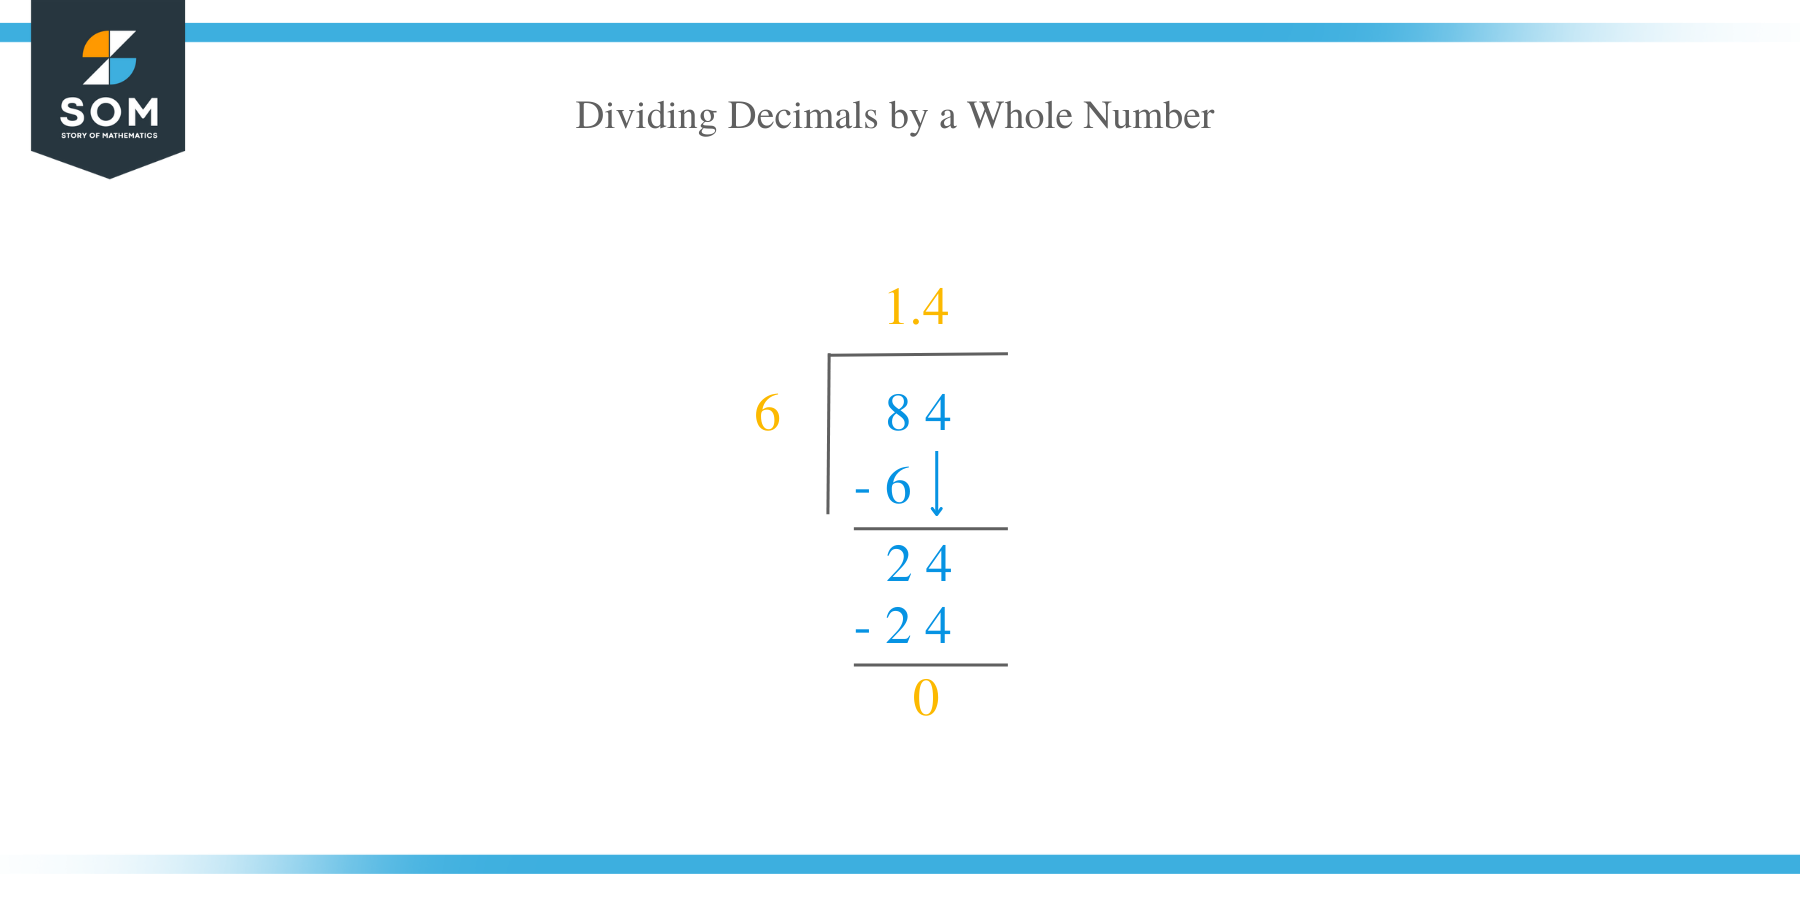 How to Divide Decimals by a Whole Number?